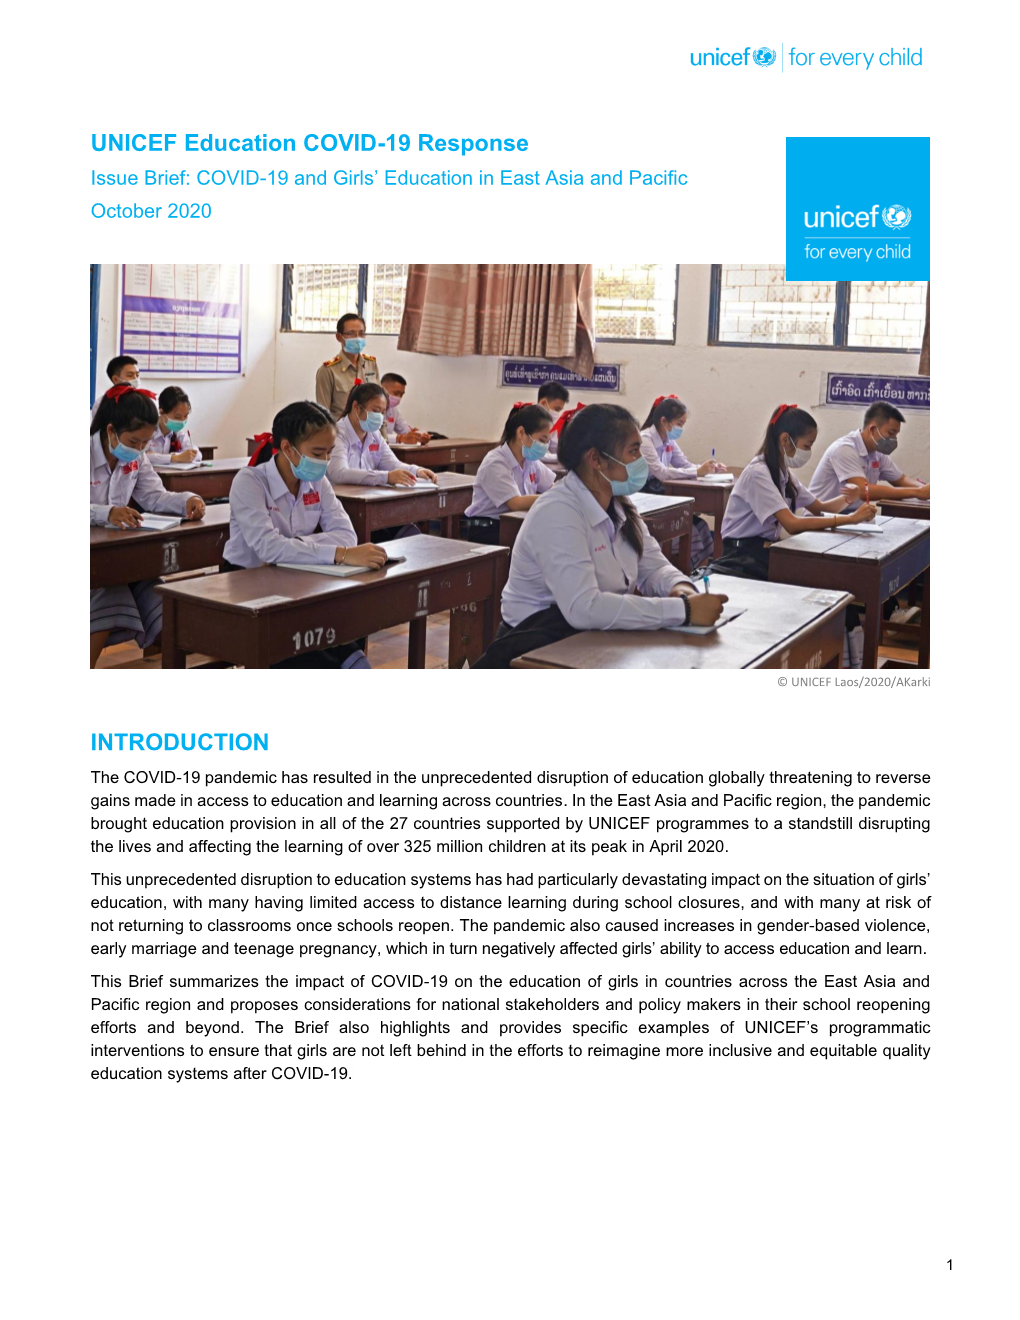 COVID-19 and Girls' Education in East Asia and Pacific